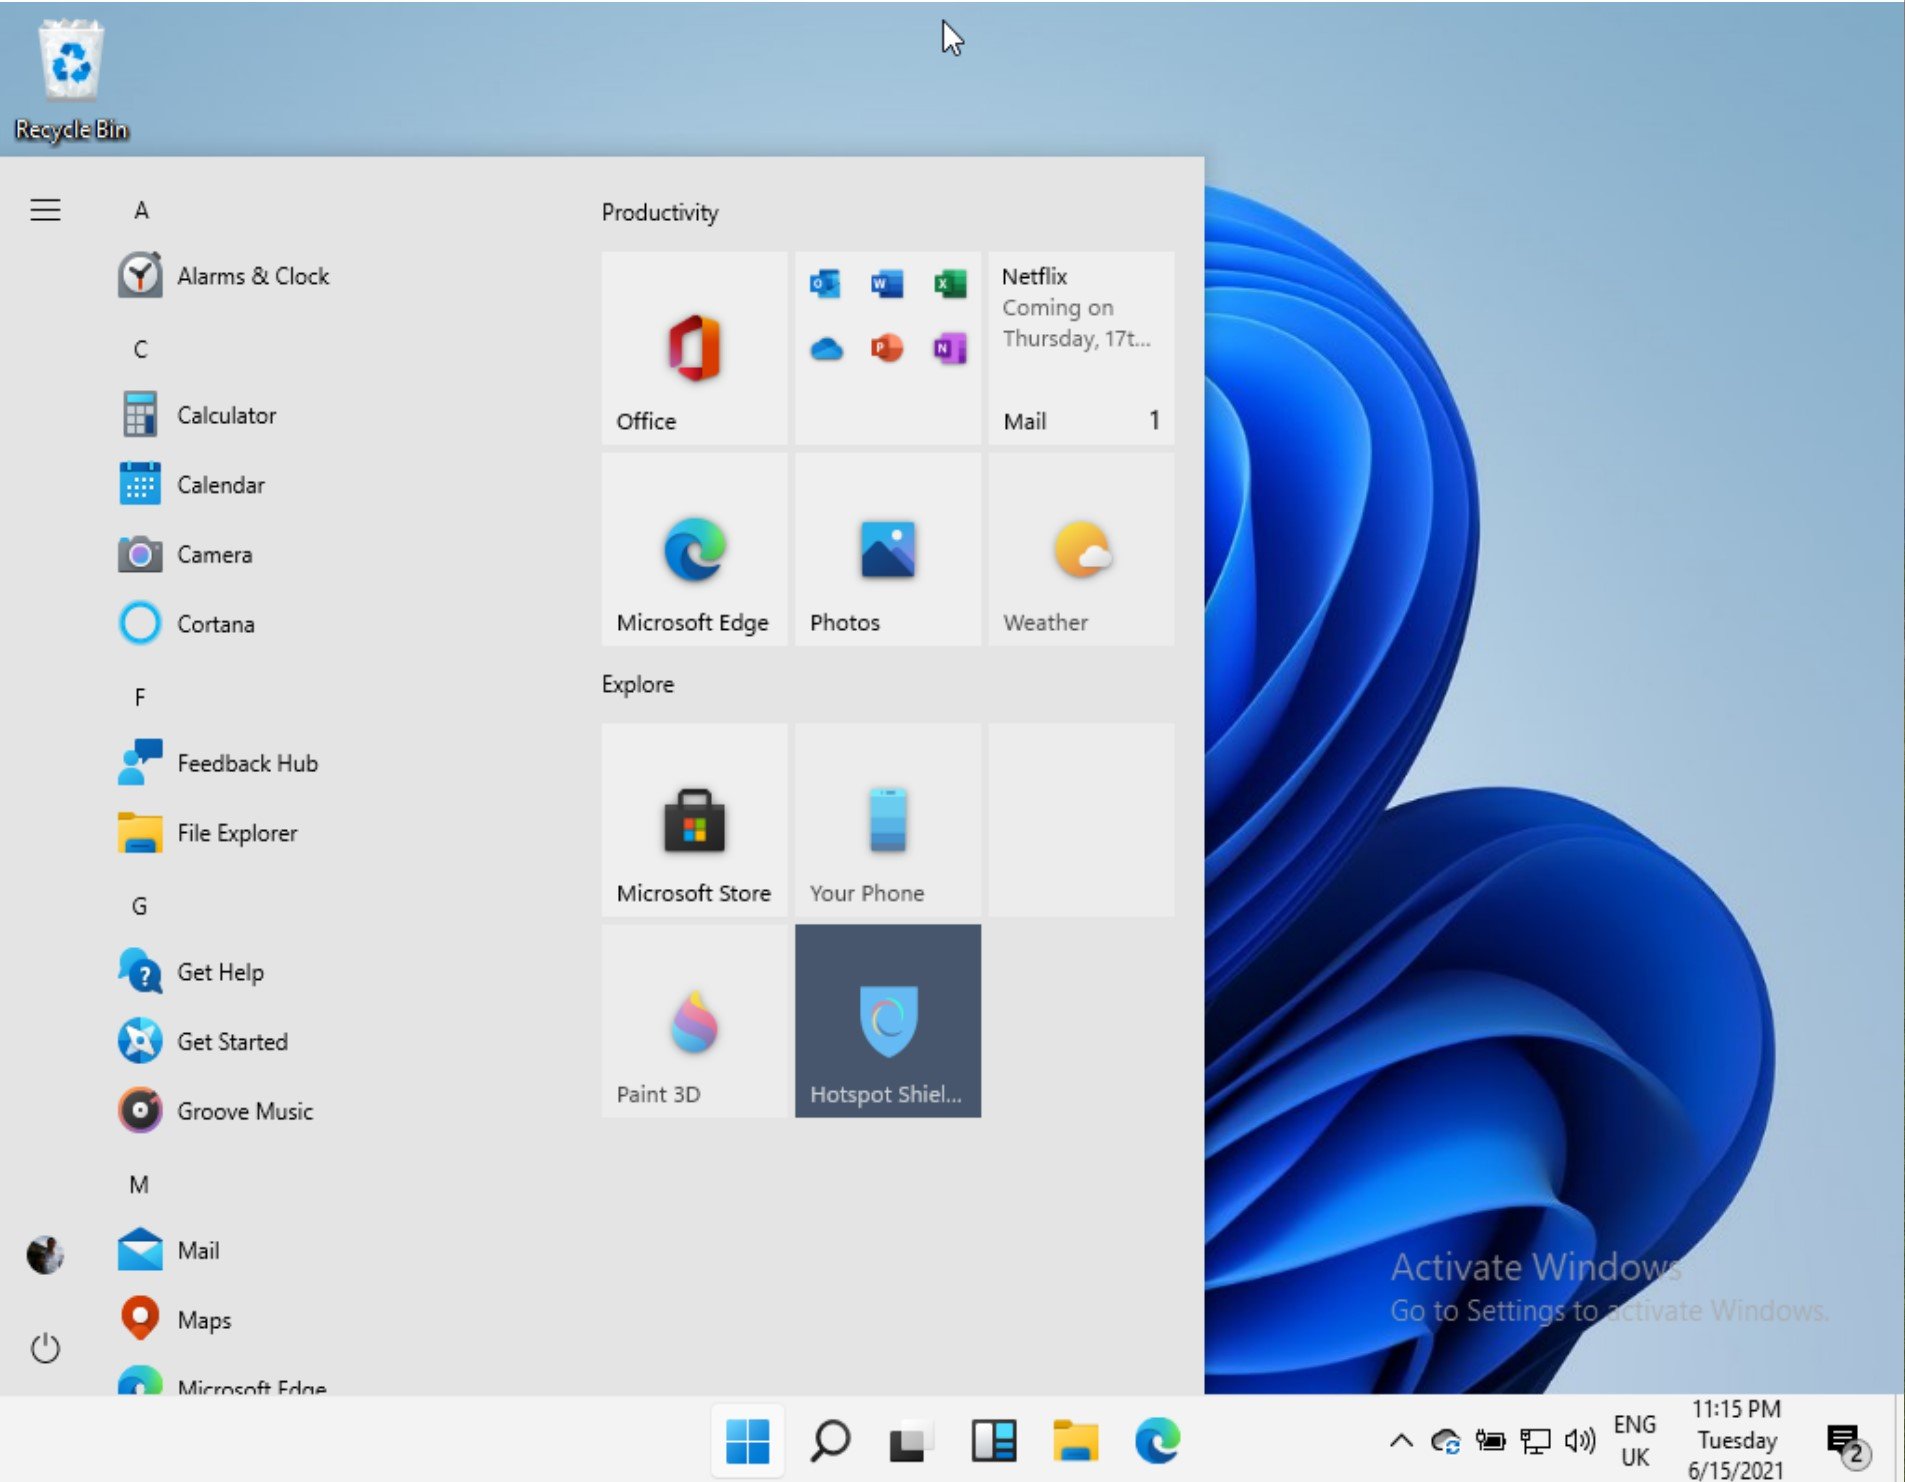 Don’t like the new Windows 11 Start Menu? You can easily bring back the old Windows 10 version